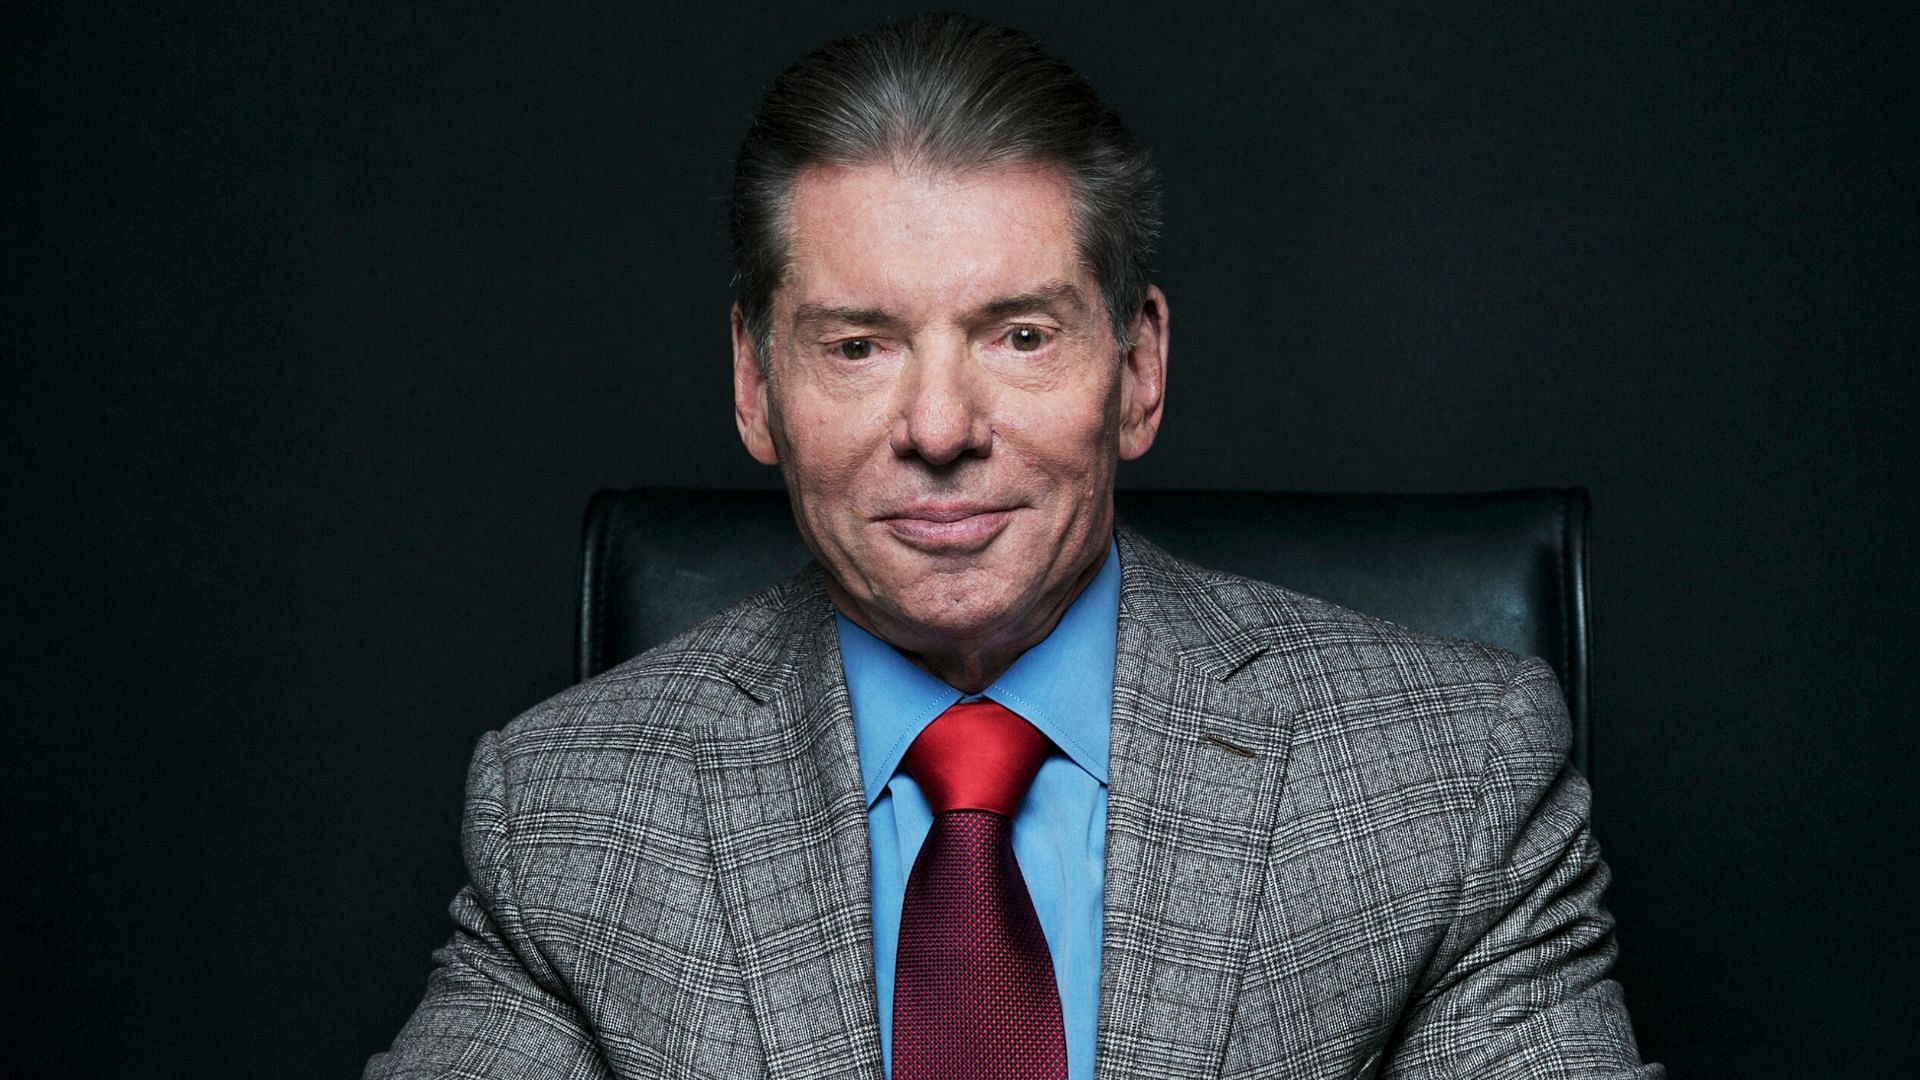 Vince McMahon has retired from WWE.